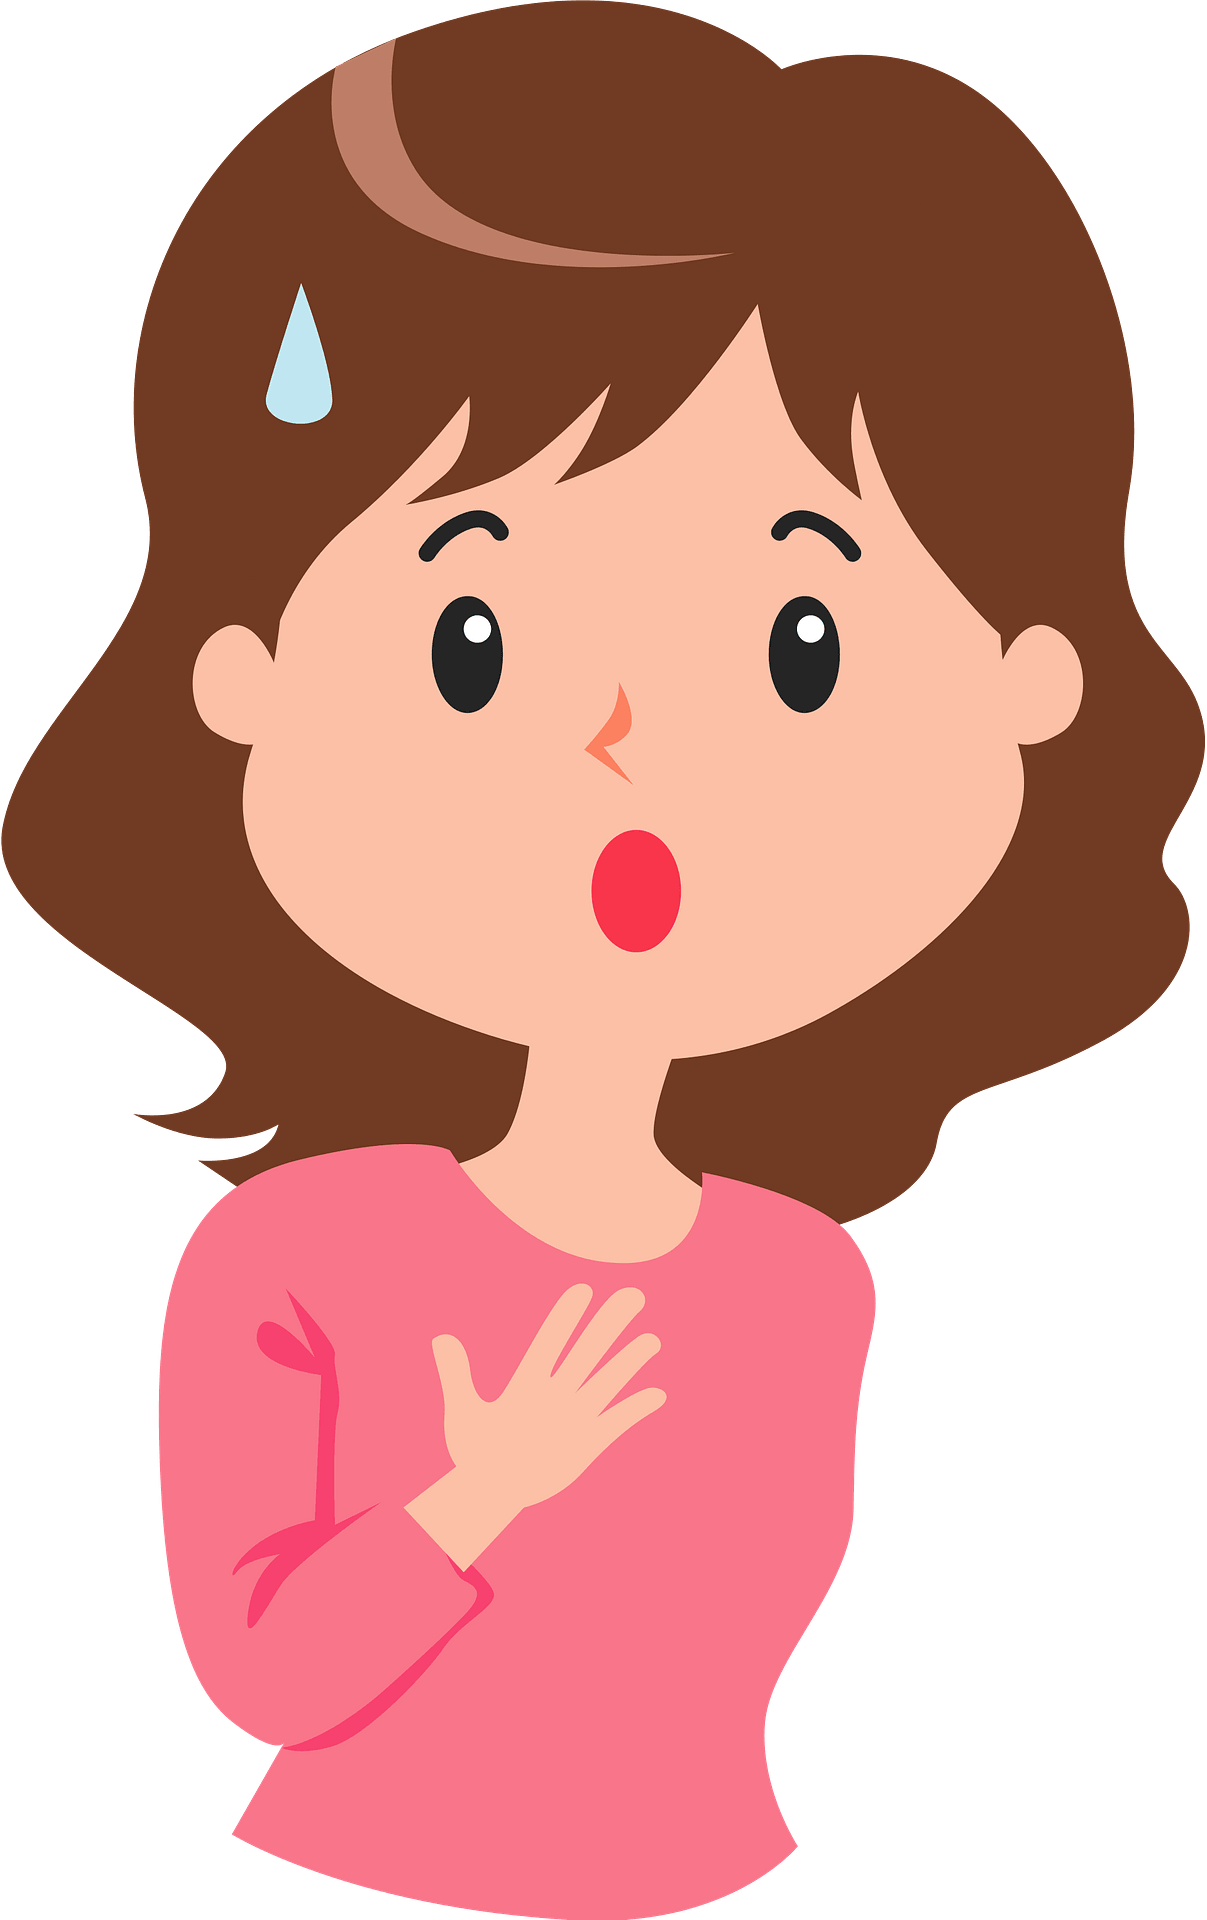 Woman Vector Surprised HQ Image Free PNG Image